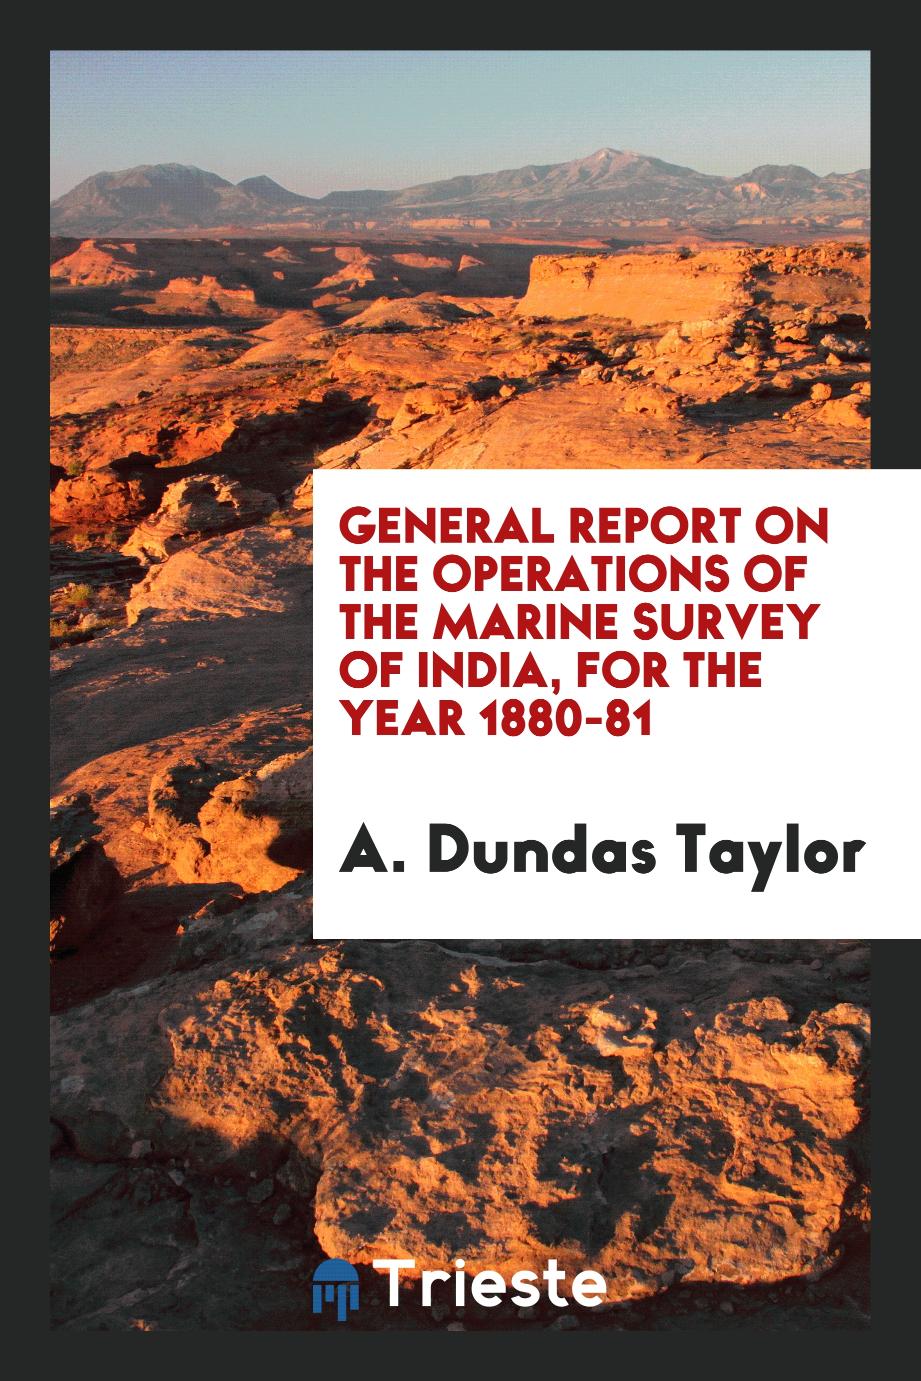 General Report on the Operations of the Marine Survey of India, for the year 1880-81